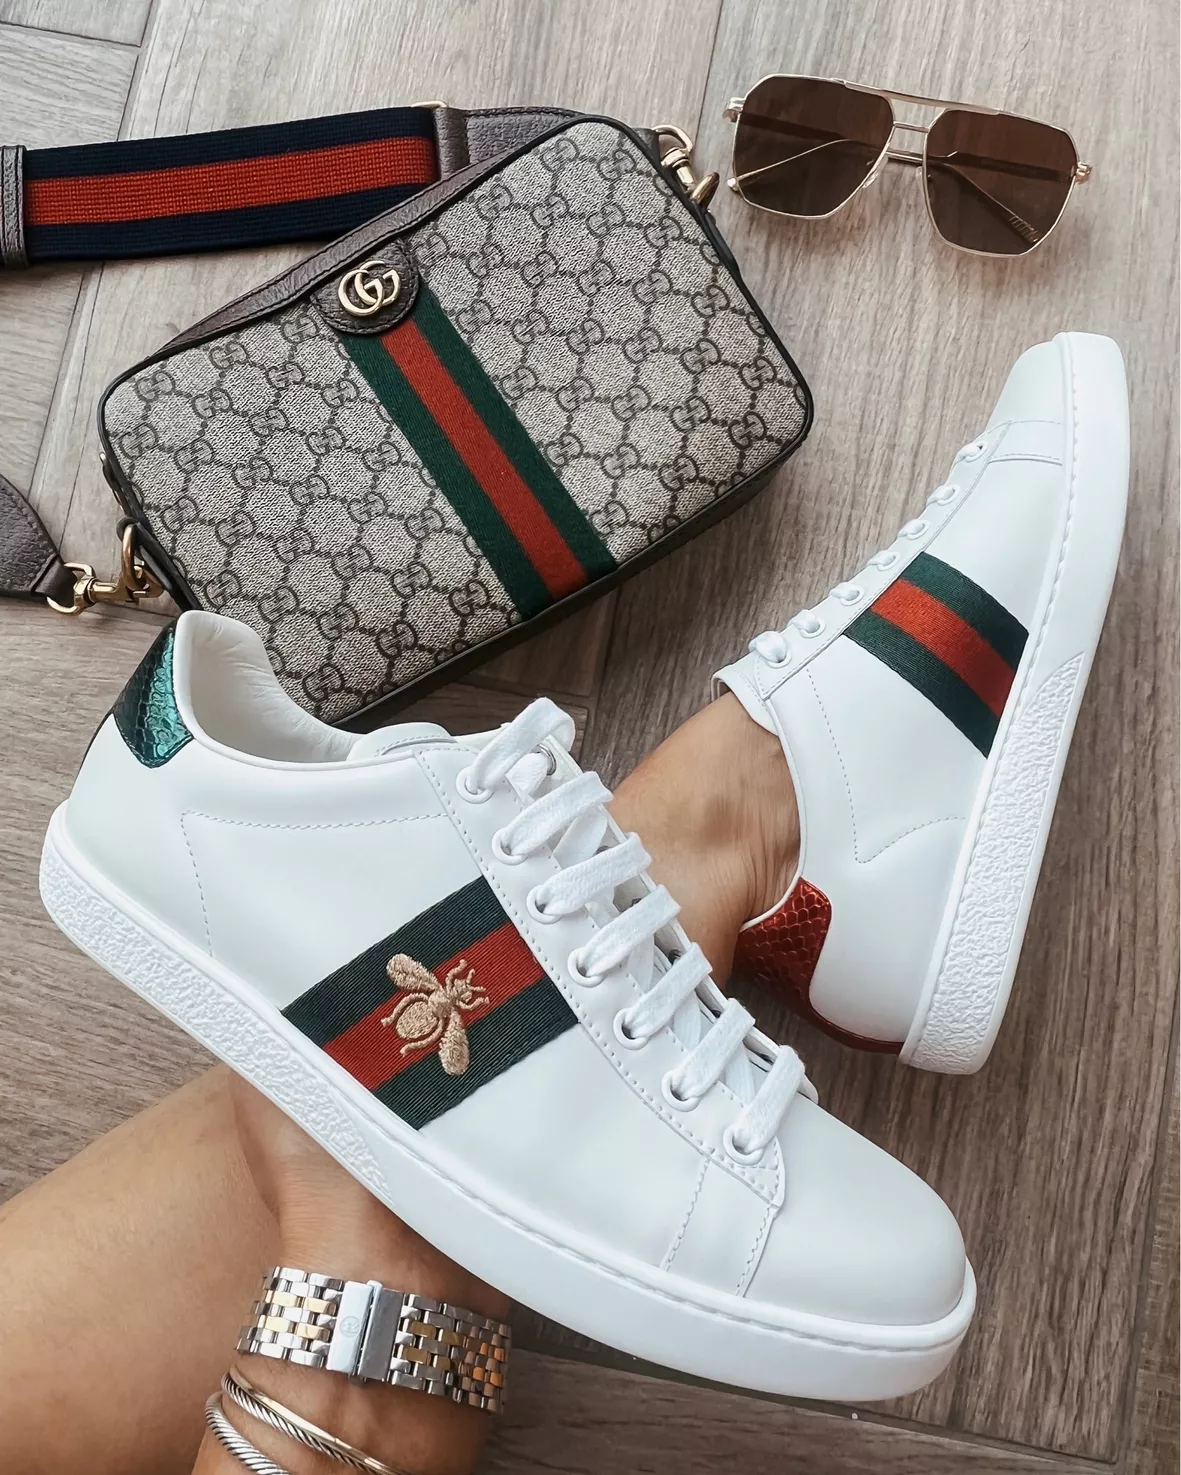 15 Gucci Ace ideas  gucci sneakers outfit, outfits, fashion